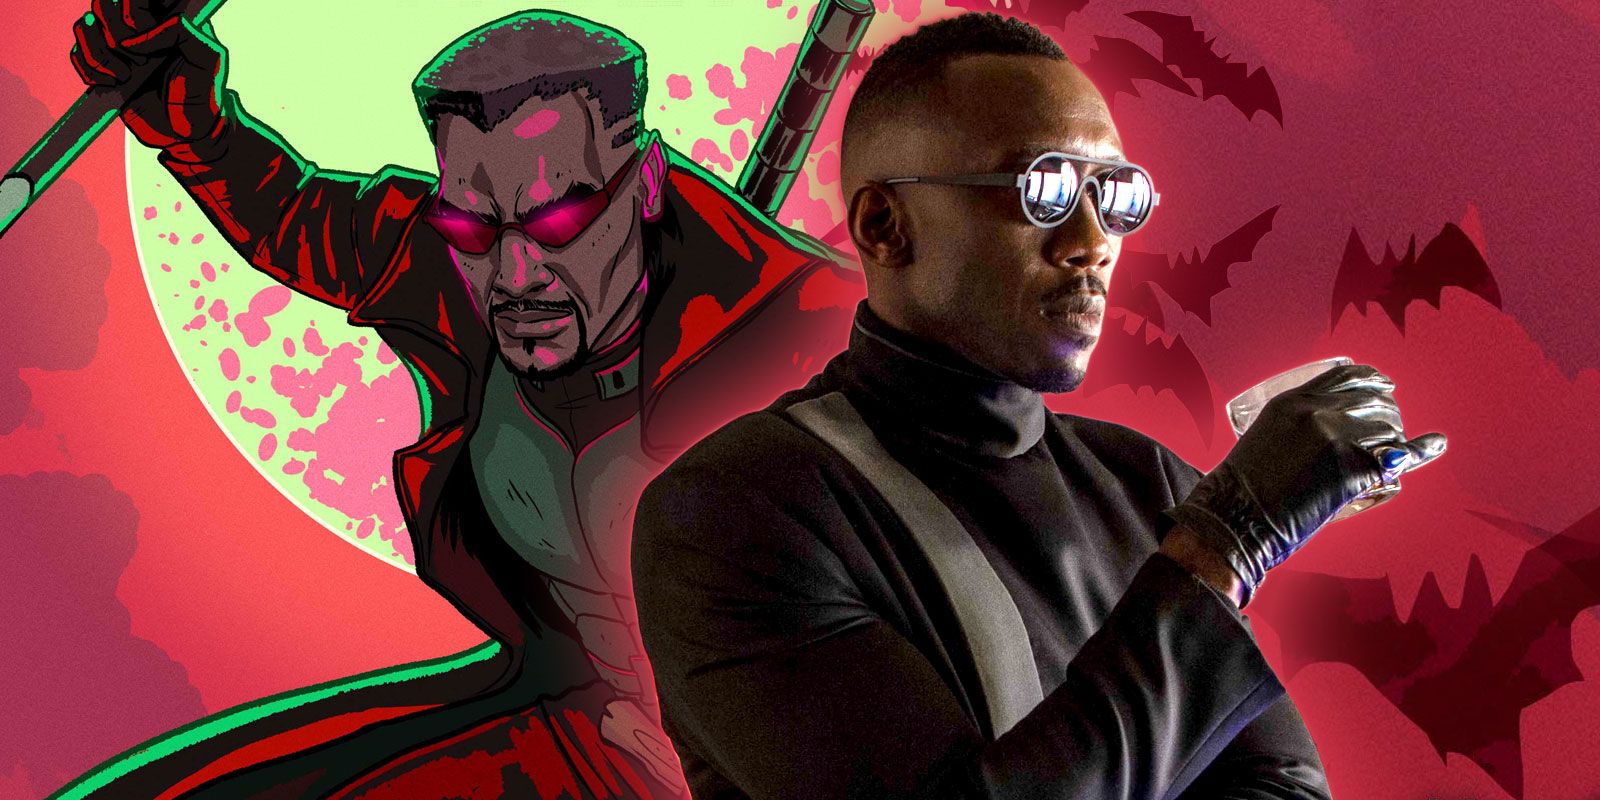 Montage of Mahershala Ali and Blade from an Avengers comic book cover.